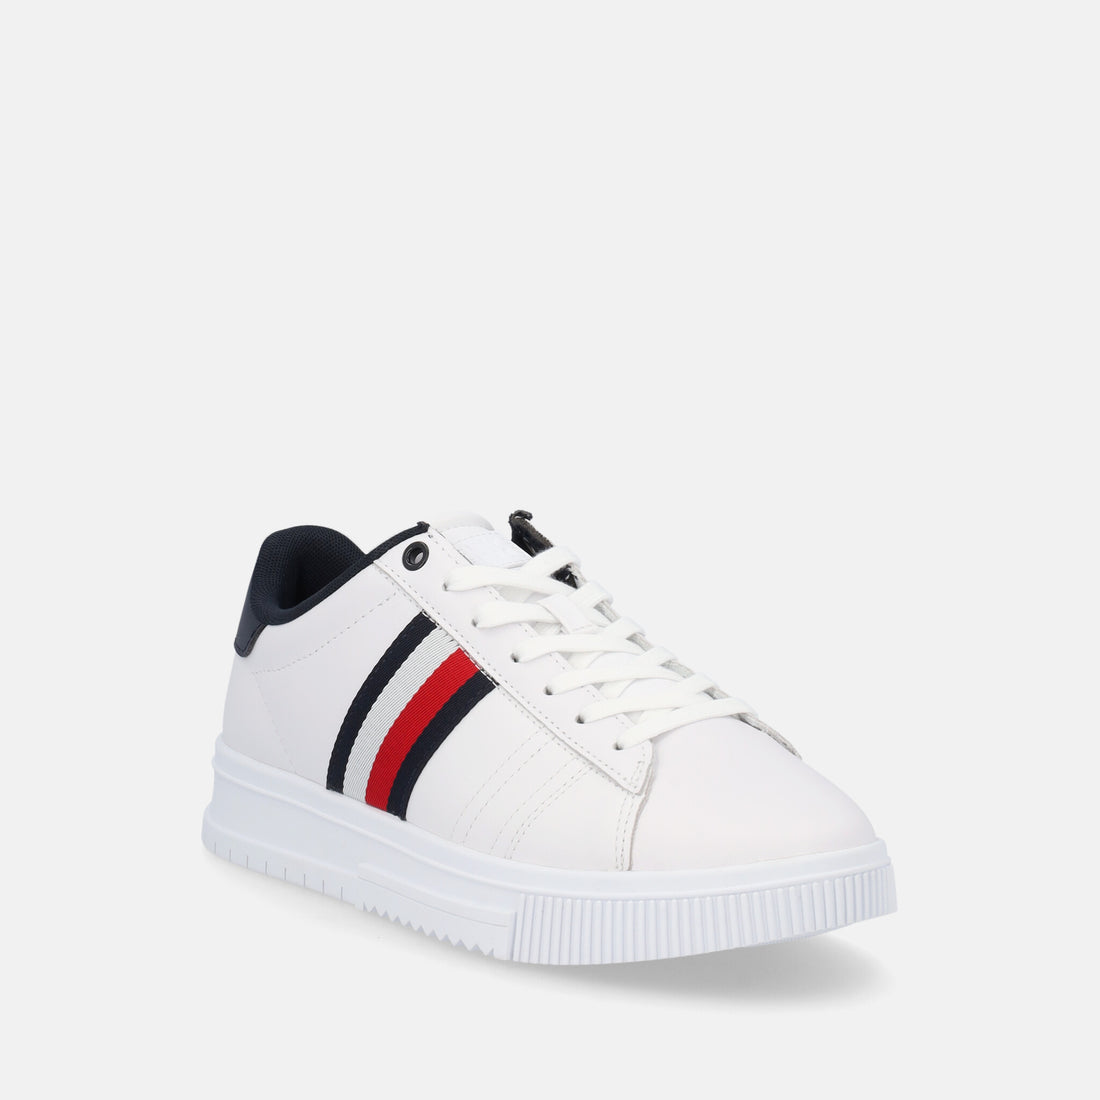 TOMMY HILFIGER SUPERCUP LEATHER